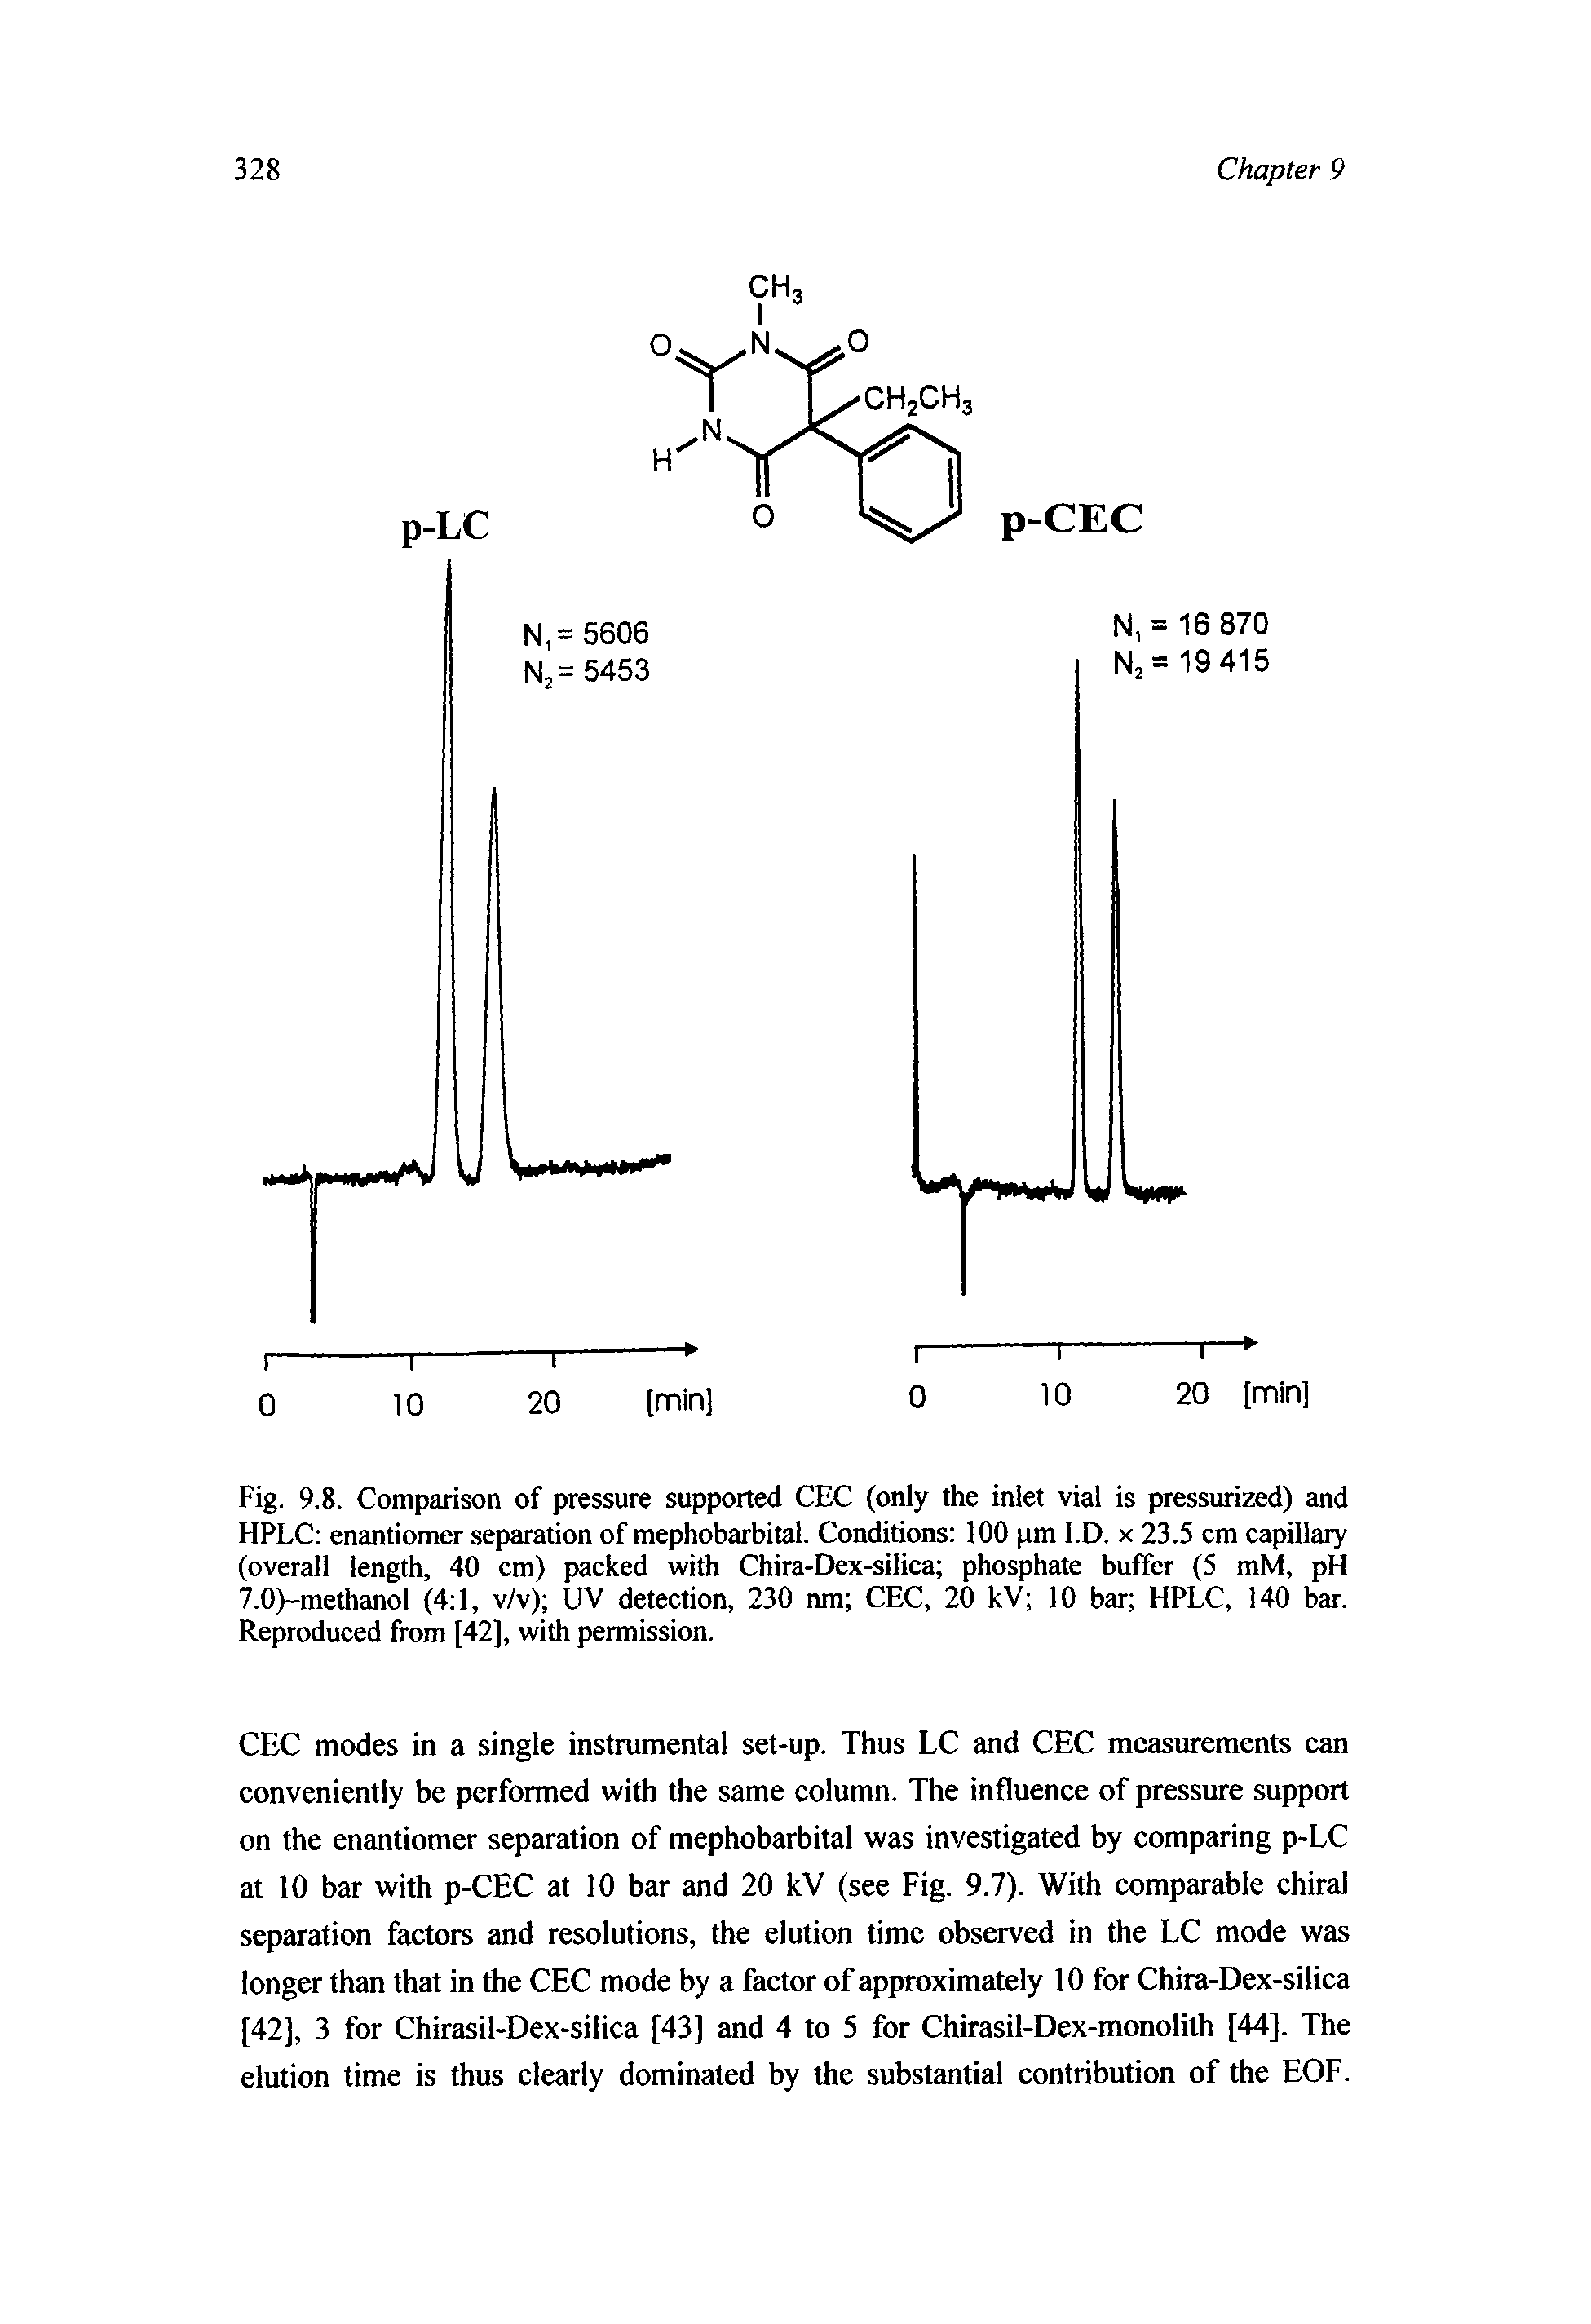 Fig. 9.8. Comparison of pressure supported CEC (only the inlet vial is pressurized) and HPLC enantiomer separation of mephobarbital. Conditions 100 pm I.D. x 23.5 cm capillary (overall length, 40 cm) packed with Chira-Dex-silica phosphate buffer (5 mM, pH 7.0)-methanol (4 1, v/v) UV detection, 230 nra CEC, 20 kV 10 bar HPLC, 140 bar. Reproduced from [42], with permission.